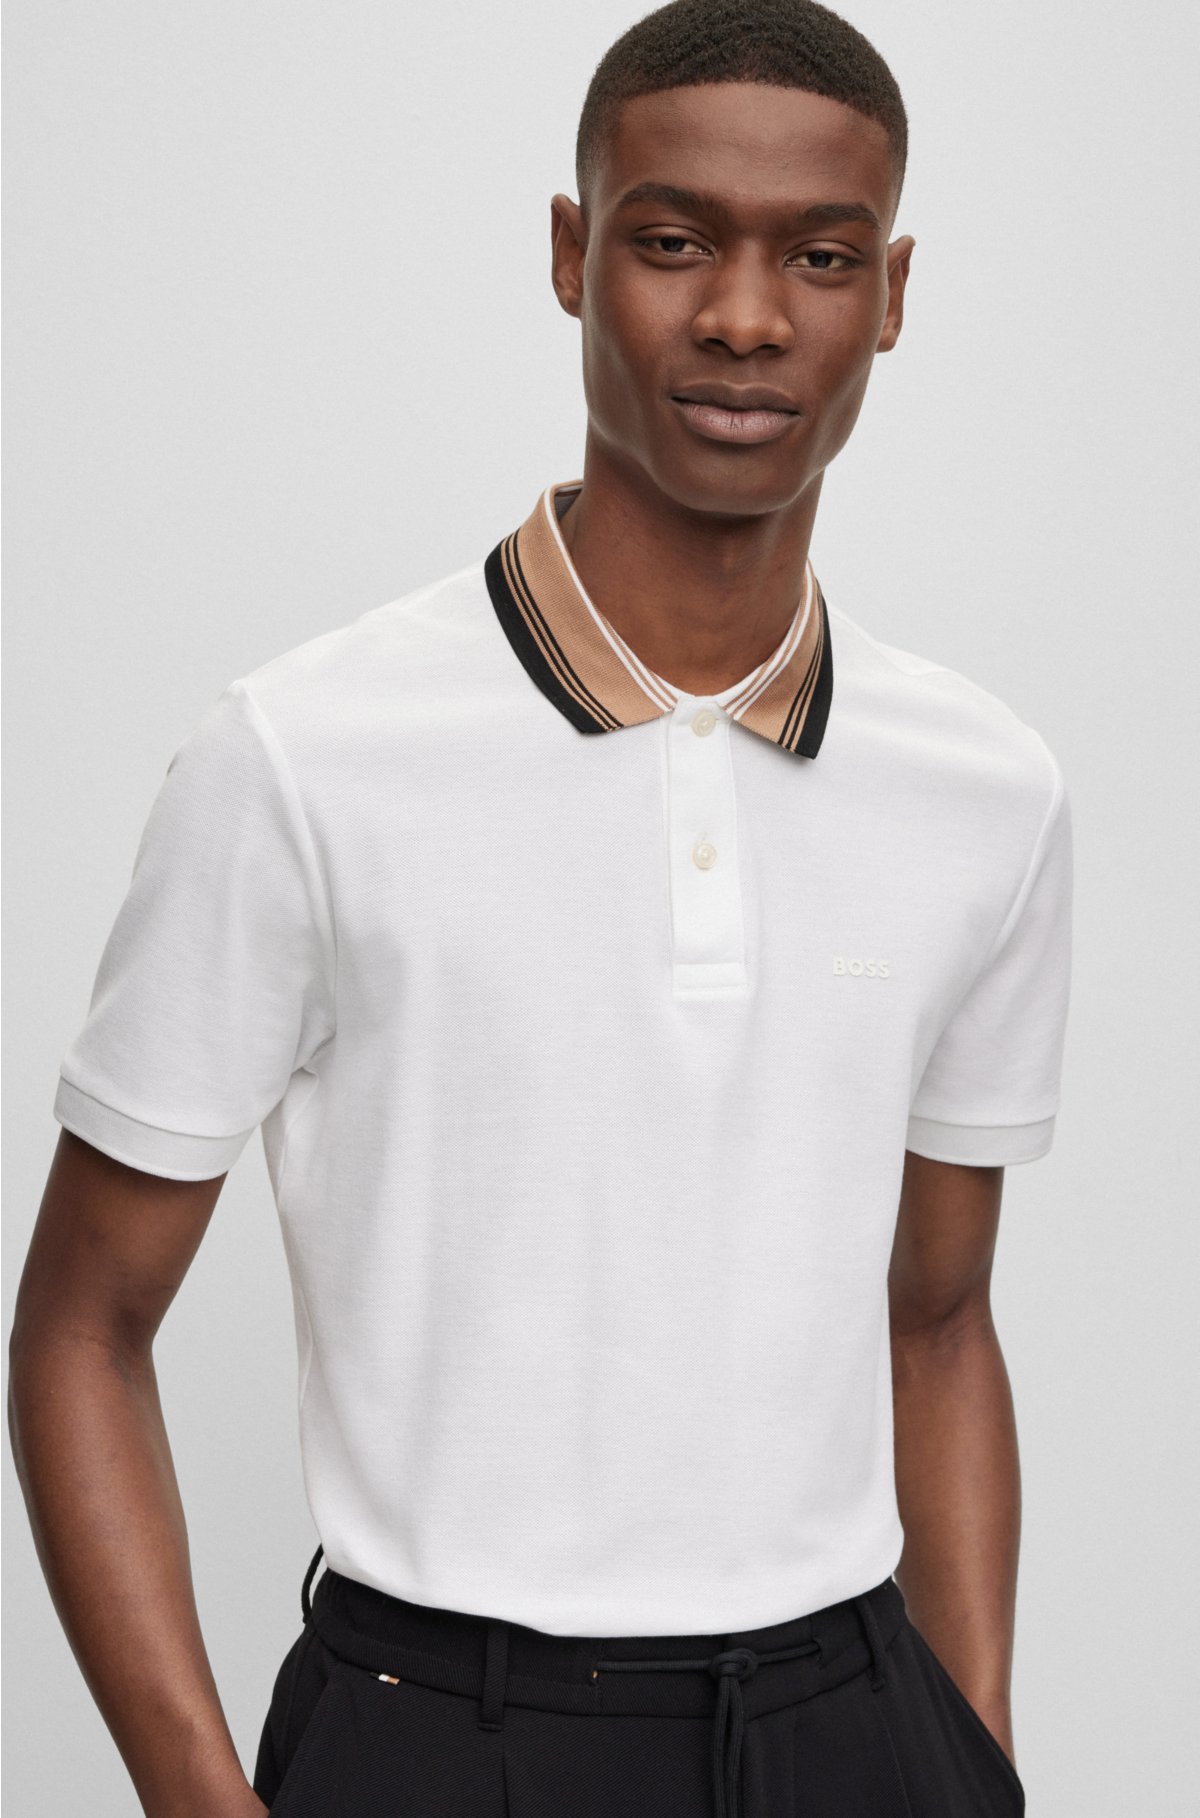 Cotton-piqué slim-fit polo shirt with striped collar, White